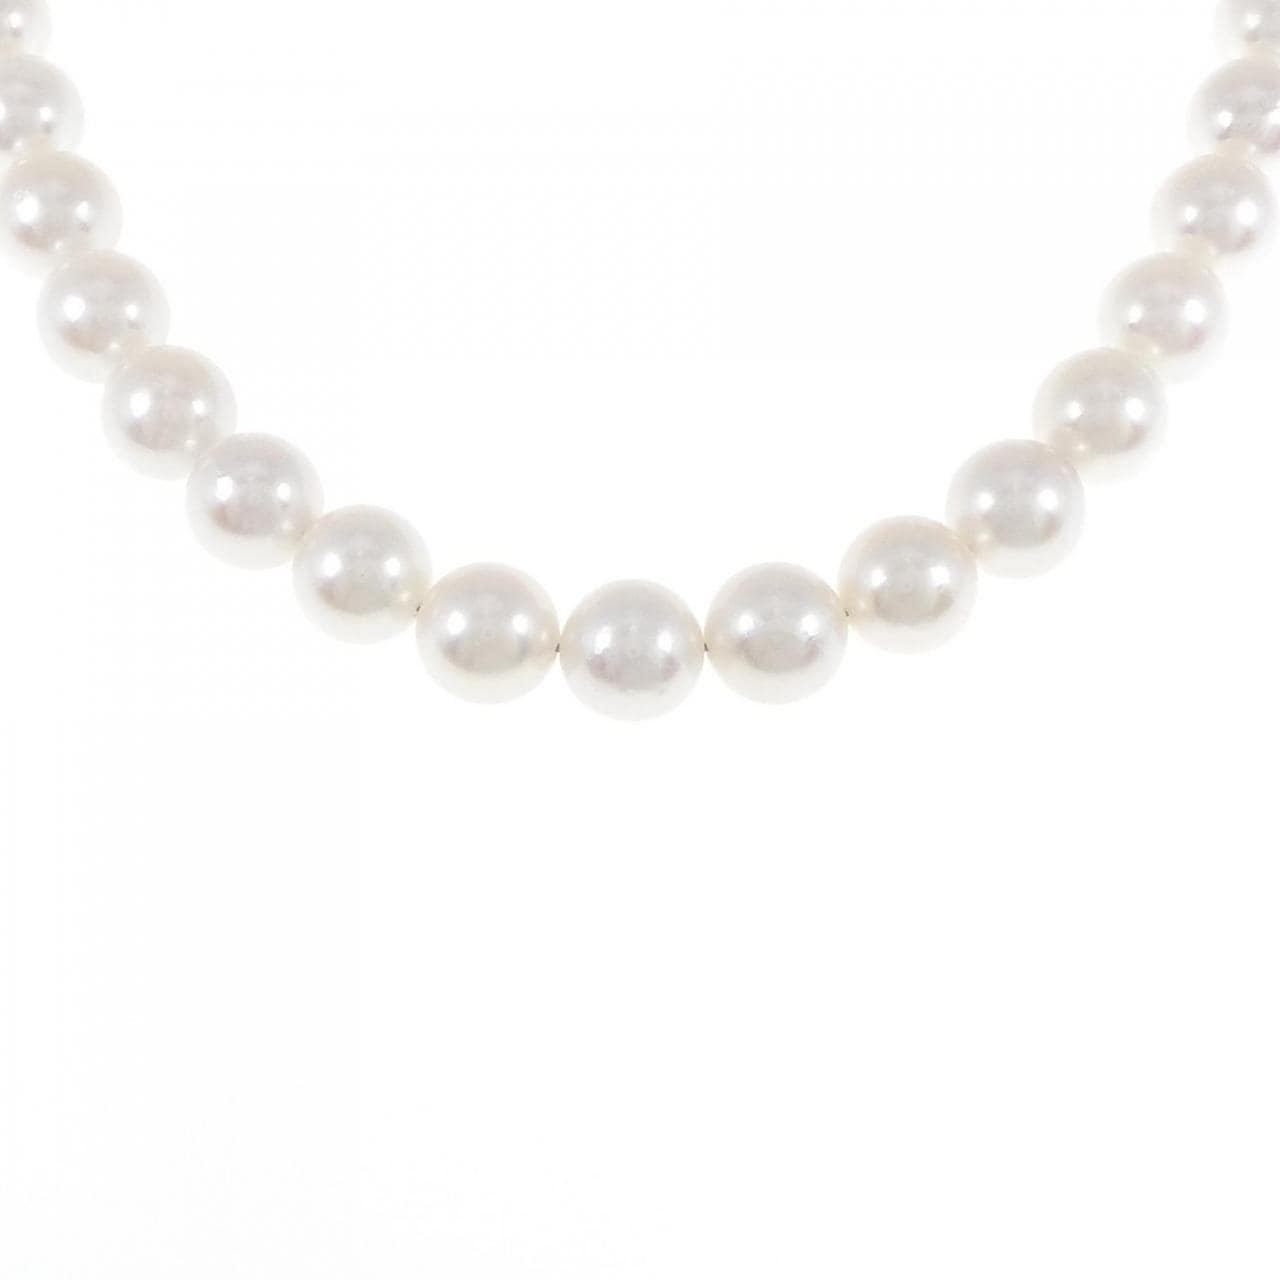 [BRAND NEW] Silver Clasp Flower Bead Akoya Pearl Necklace 7-7.5mm